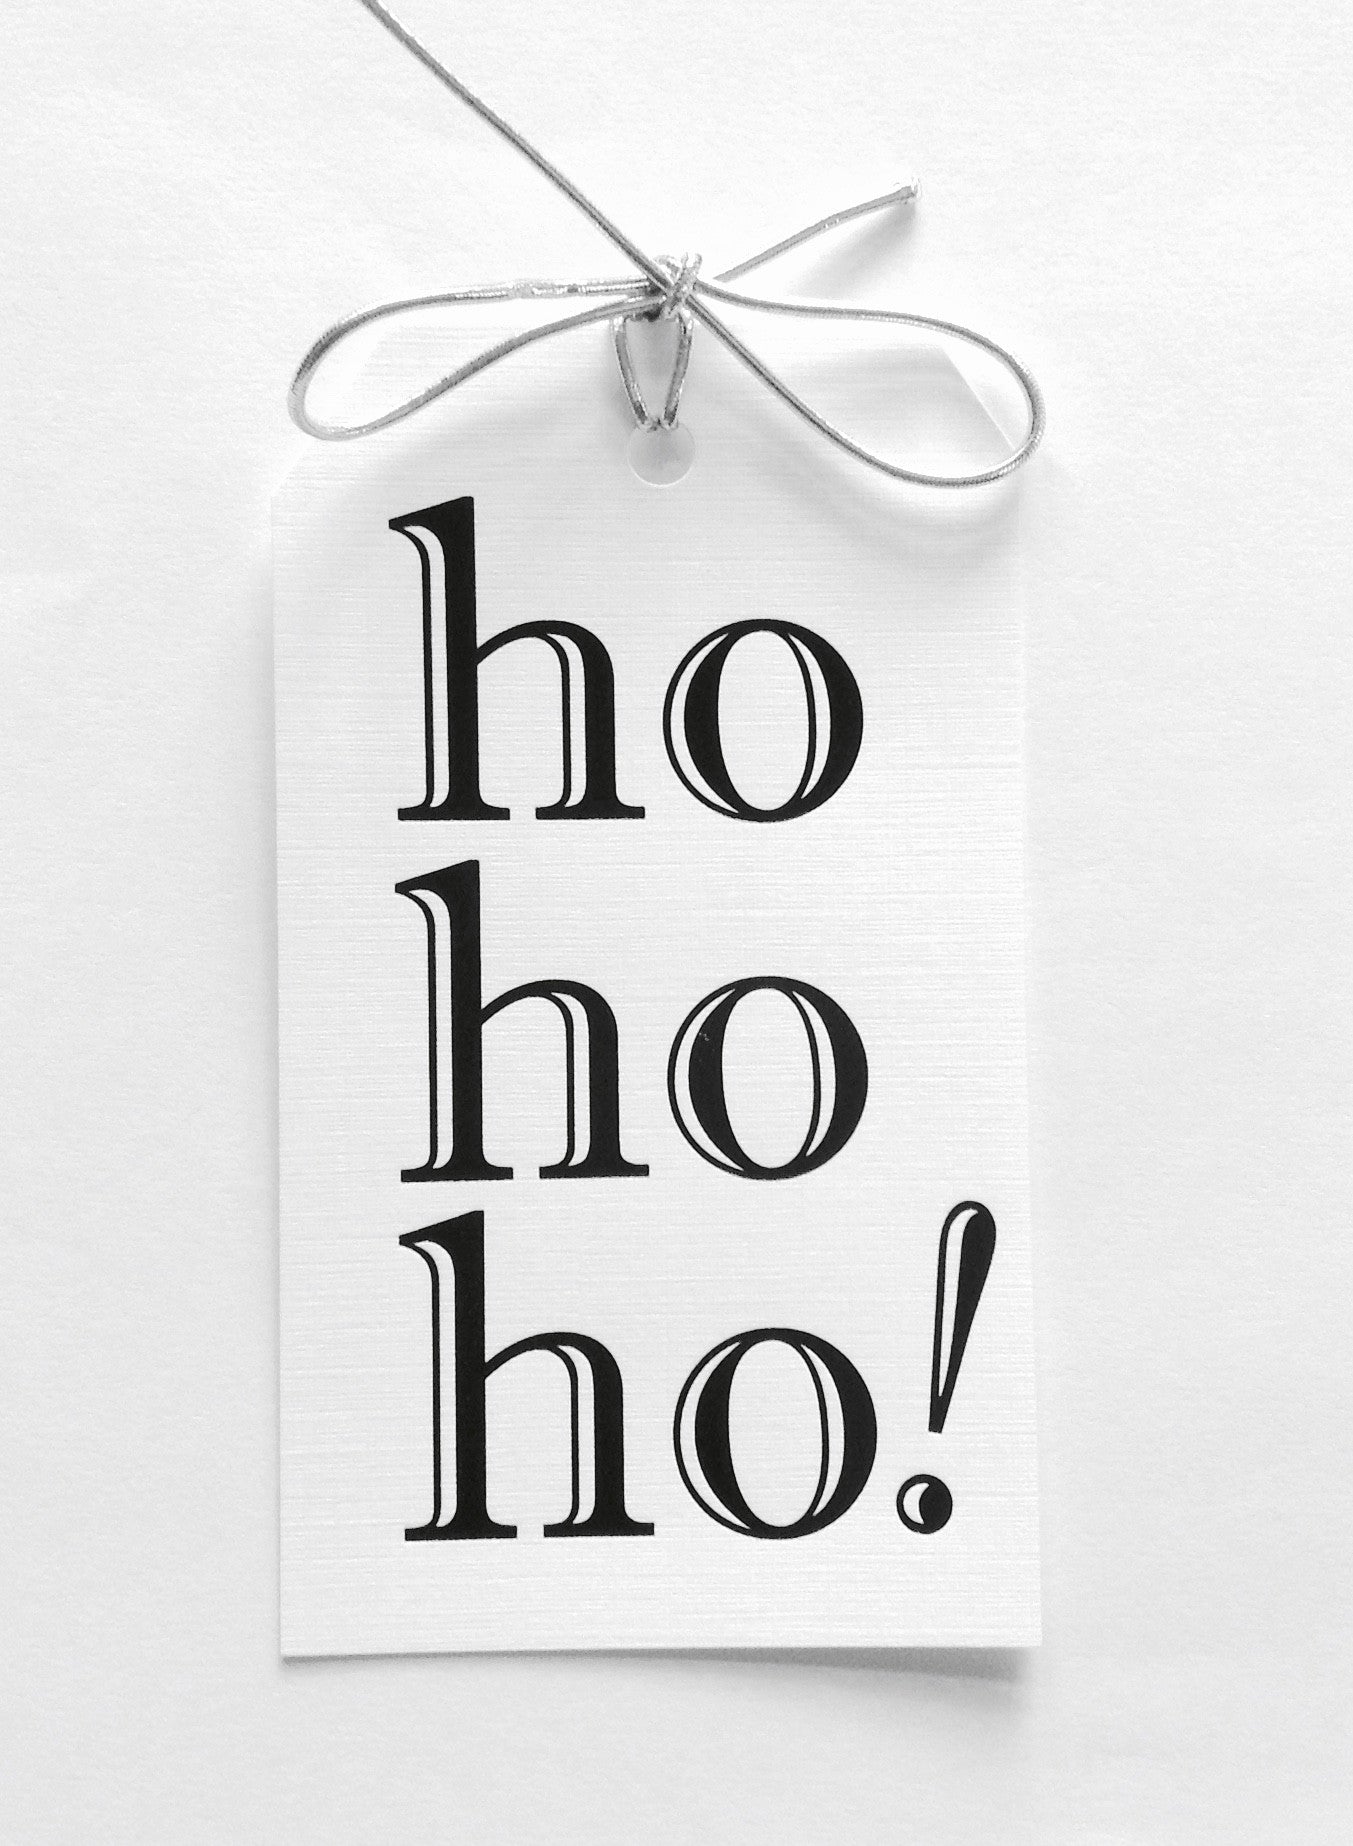 ho ho ho! gift tags with black foil on white linen paper with metallic silver tie. 3x5"